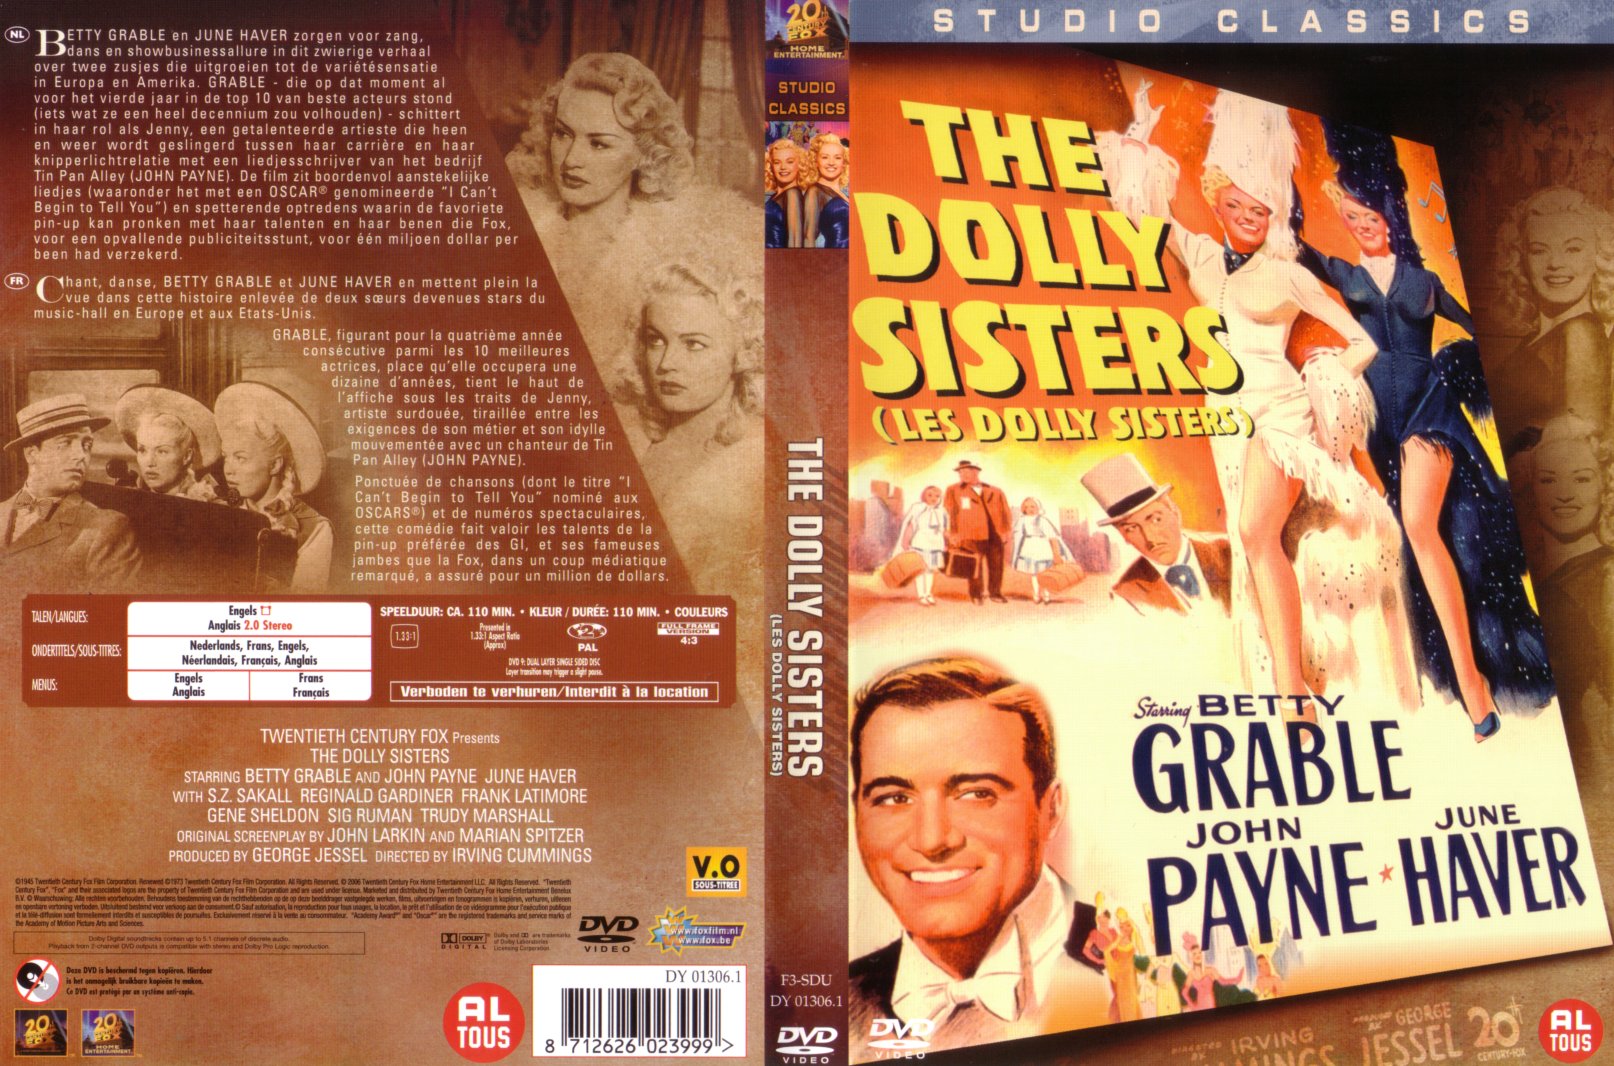 Jaquette DVD Les dolly sisters